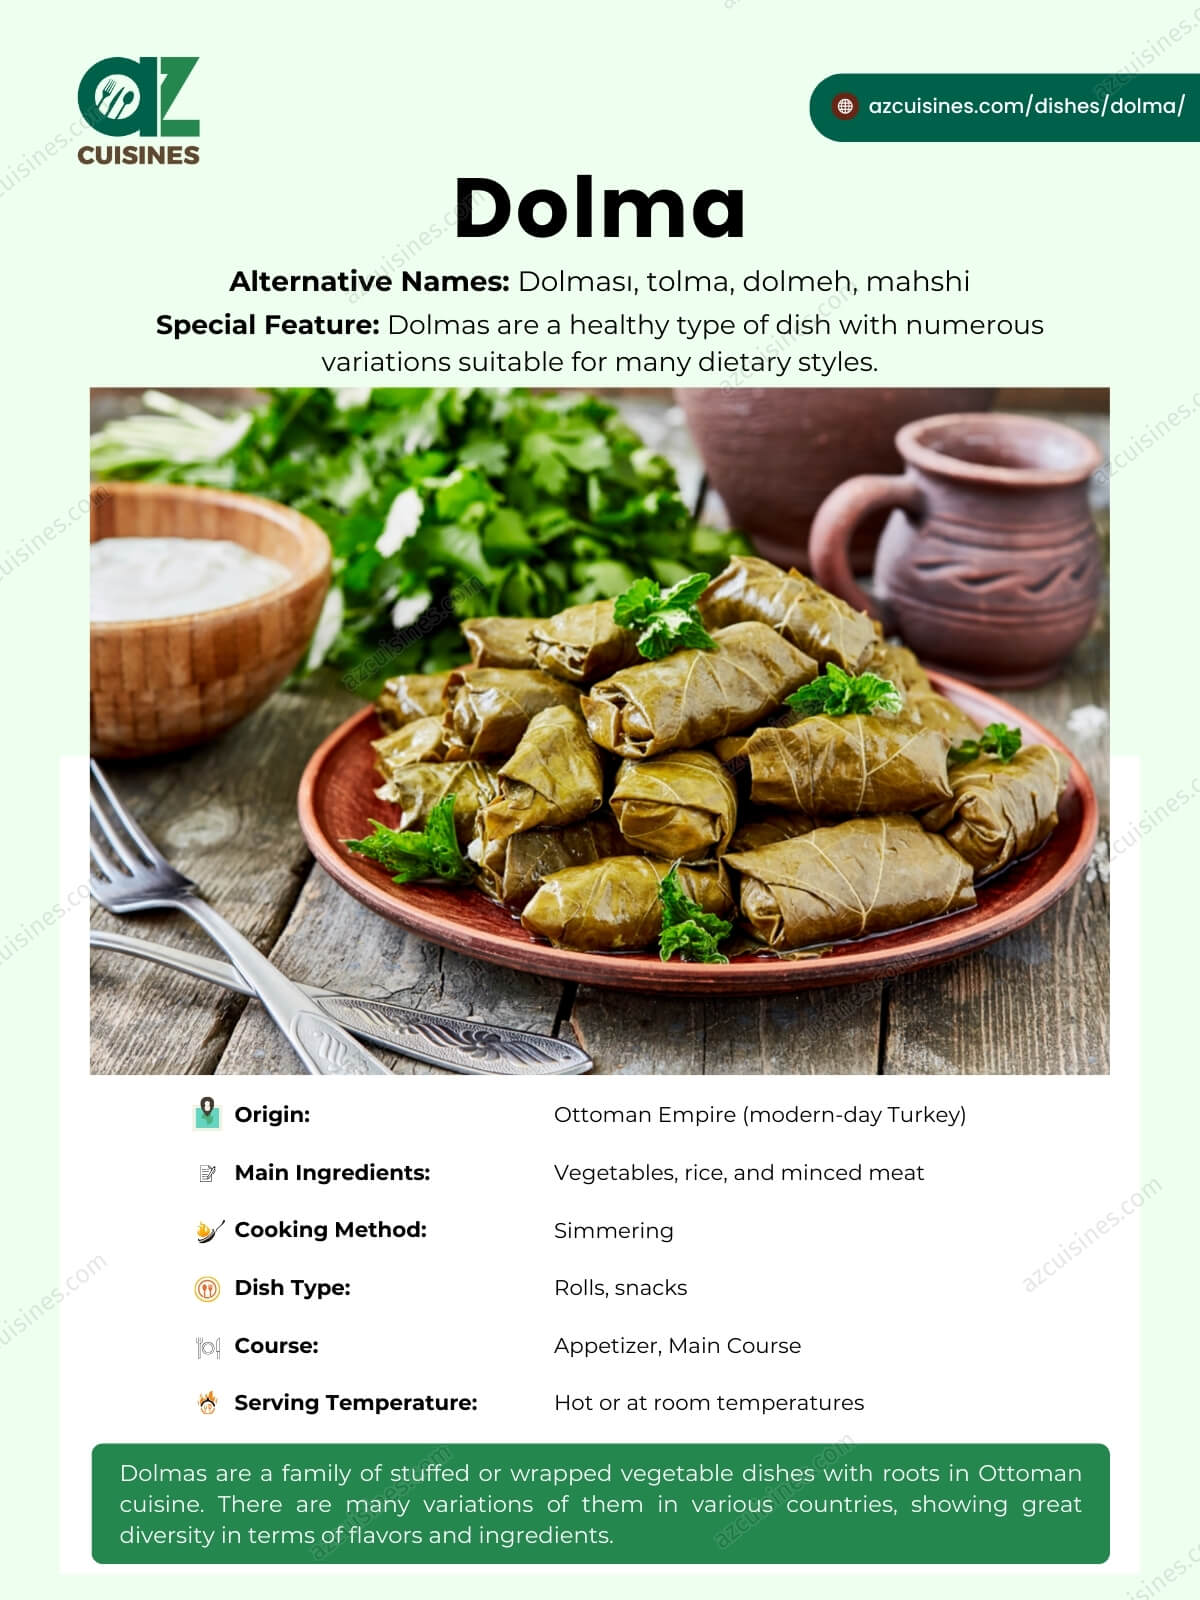 Dolma Overview